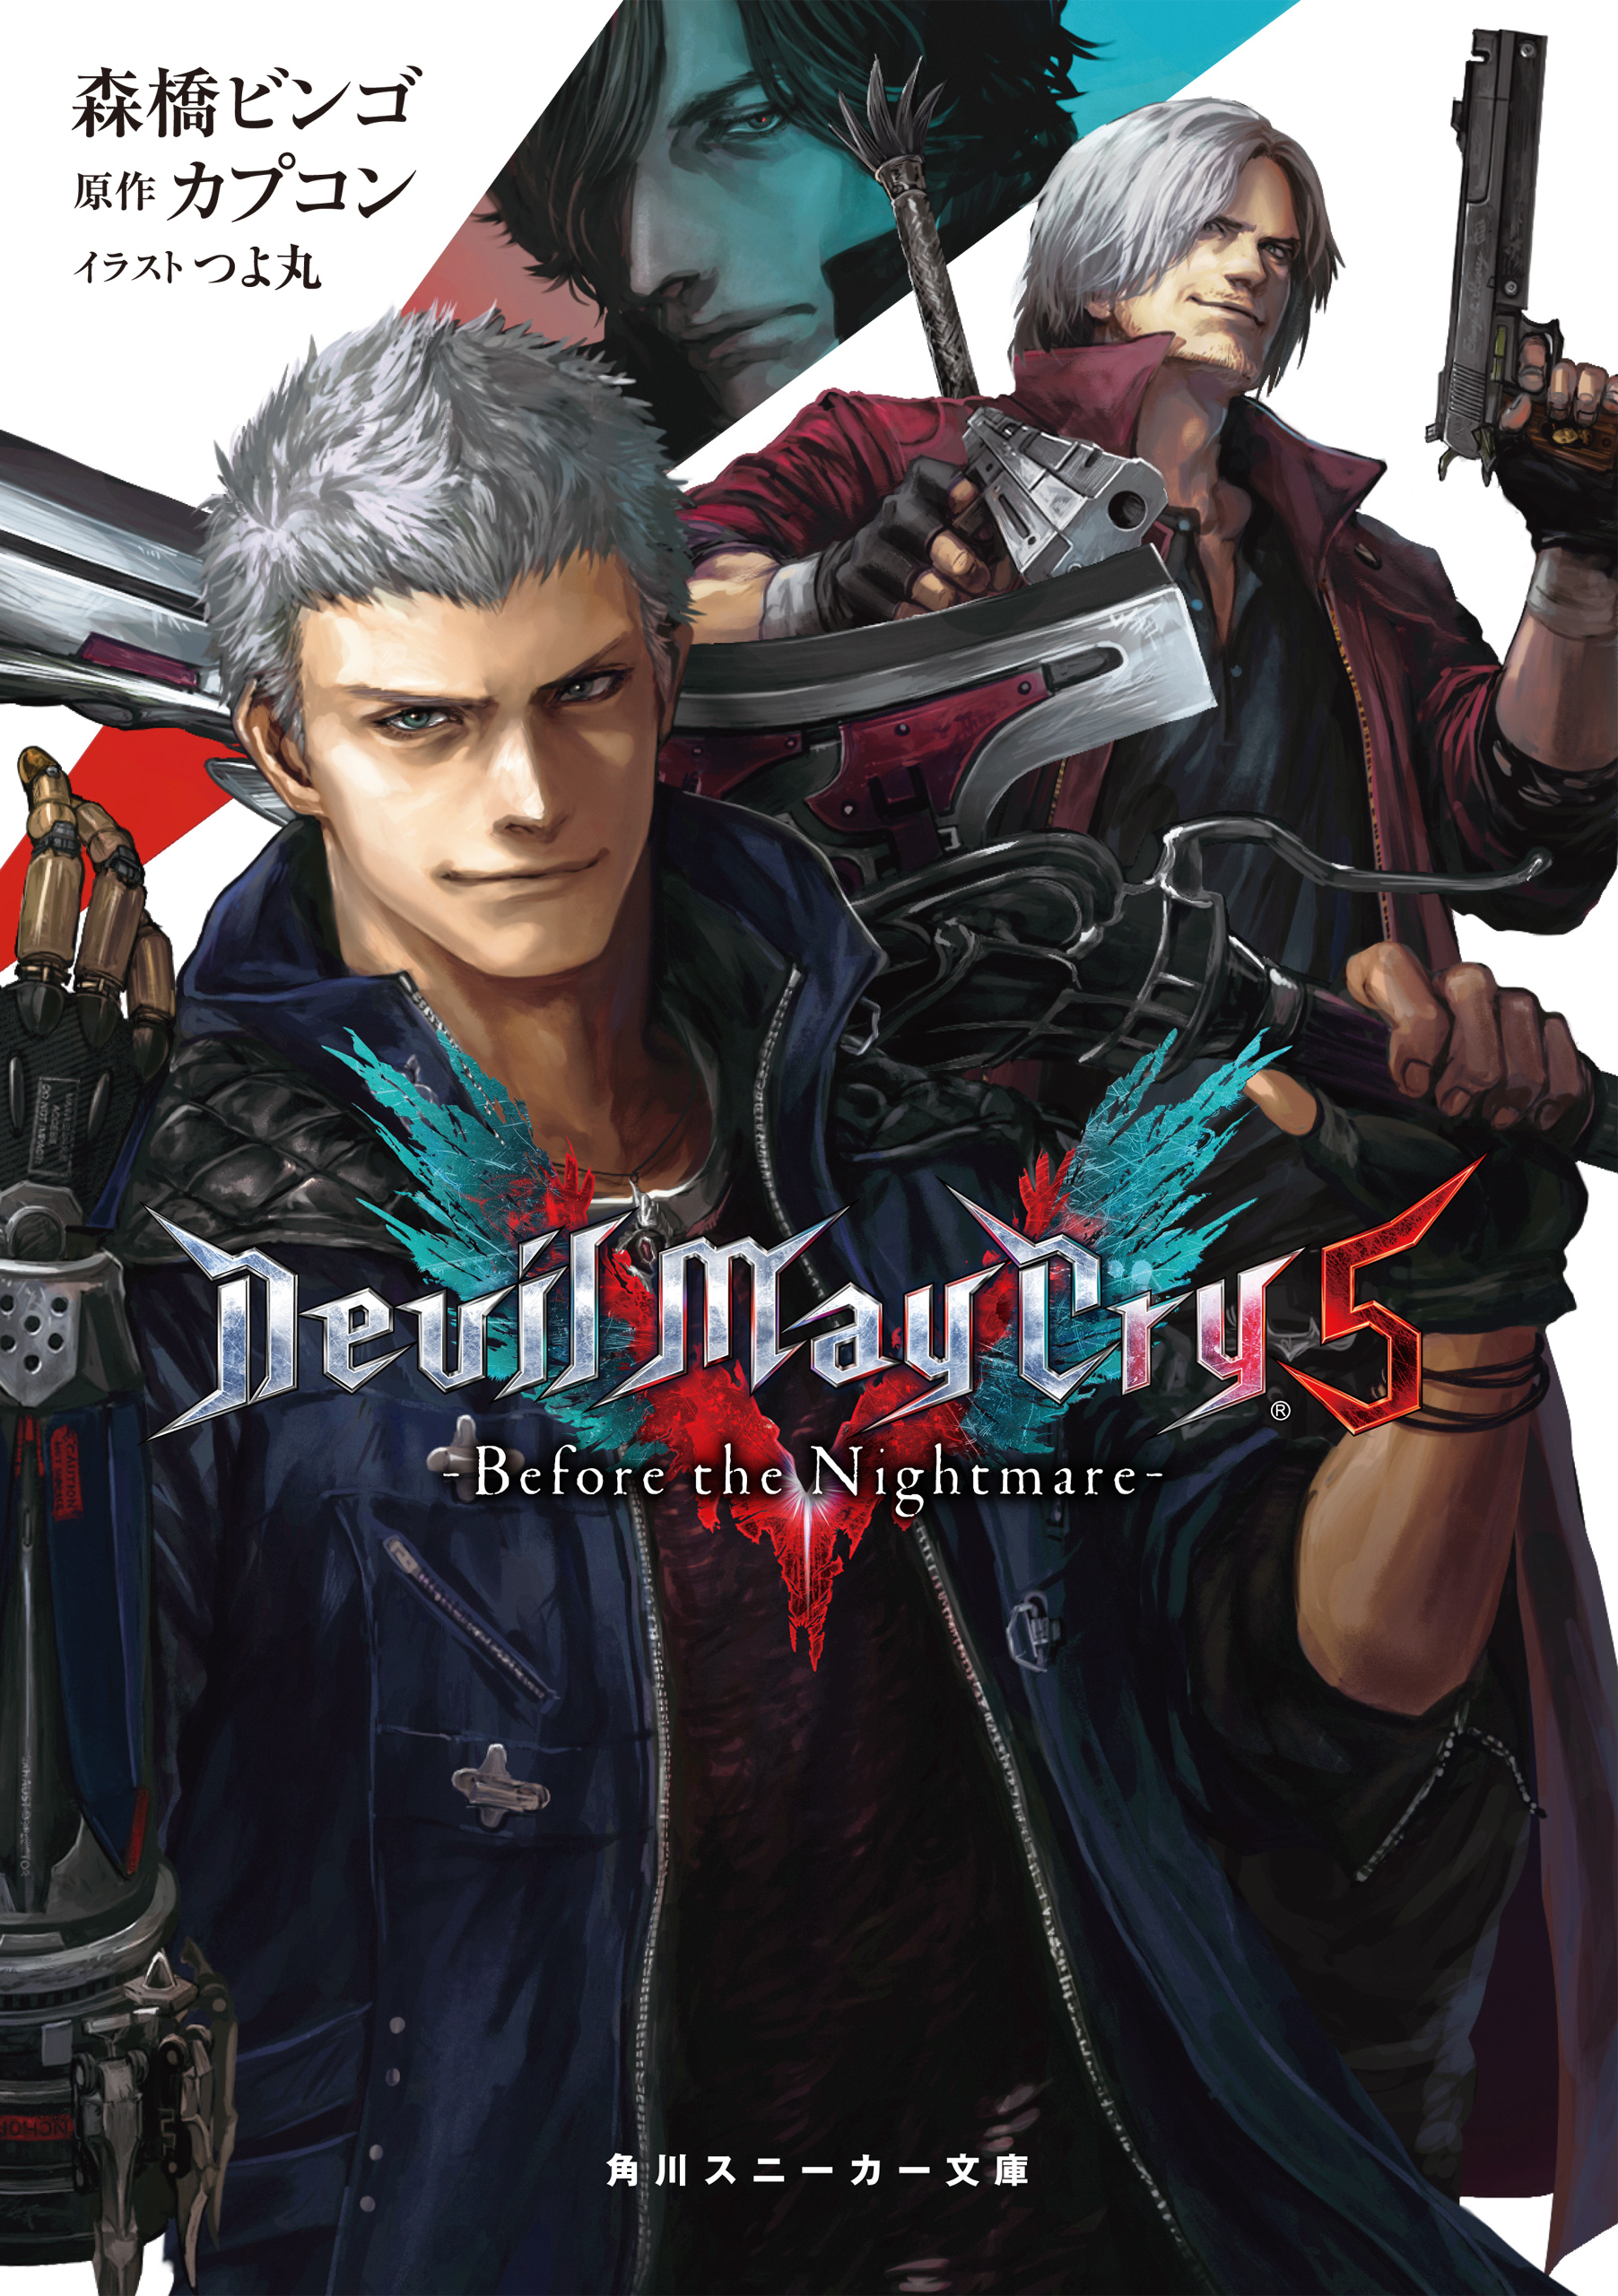 devil may cry 5 v character trailer